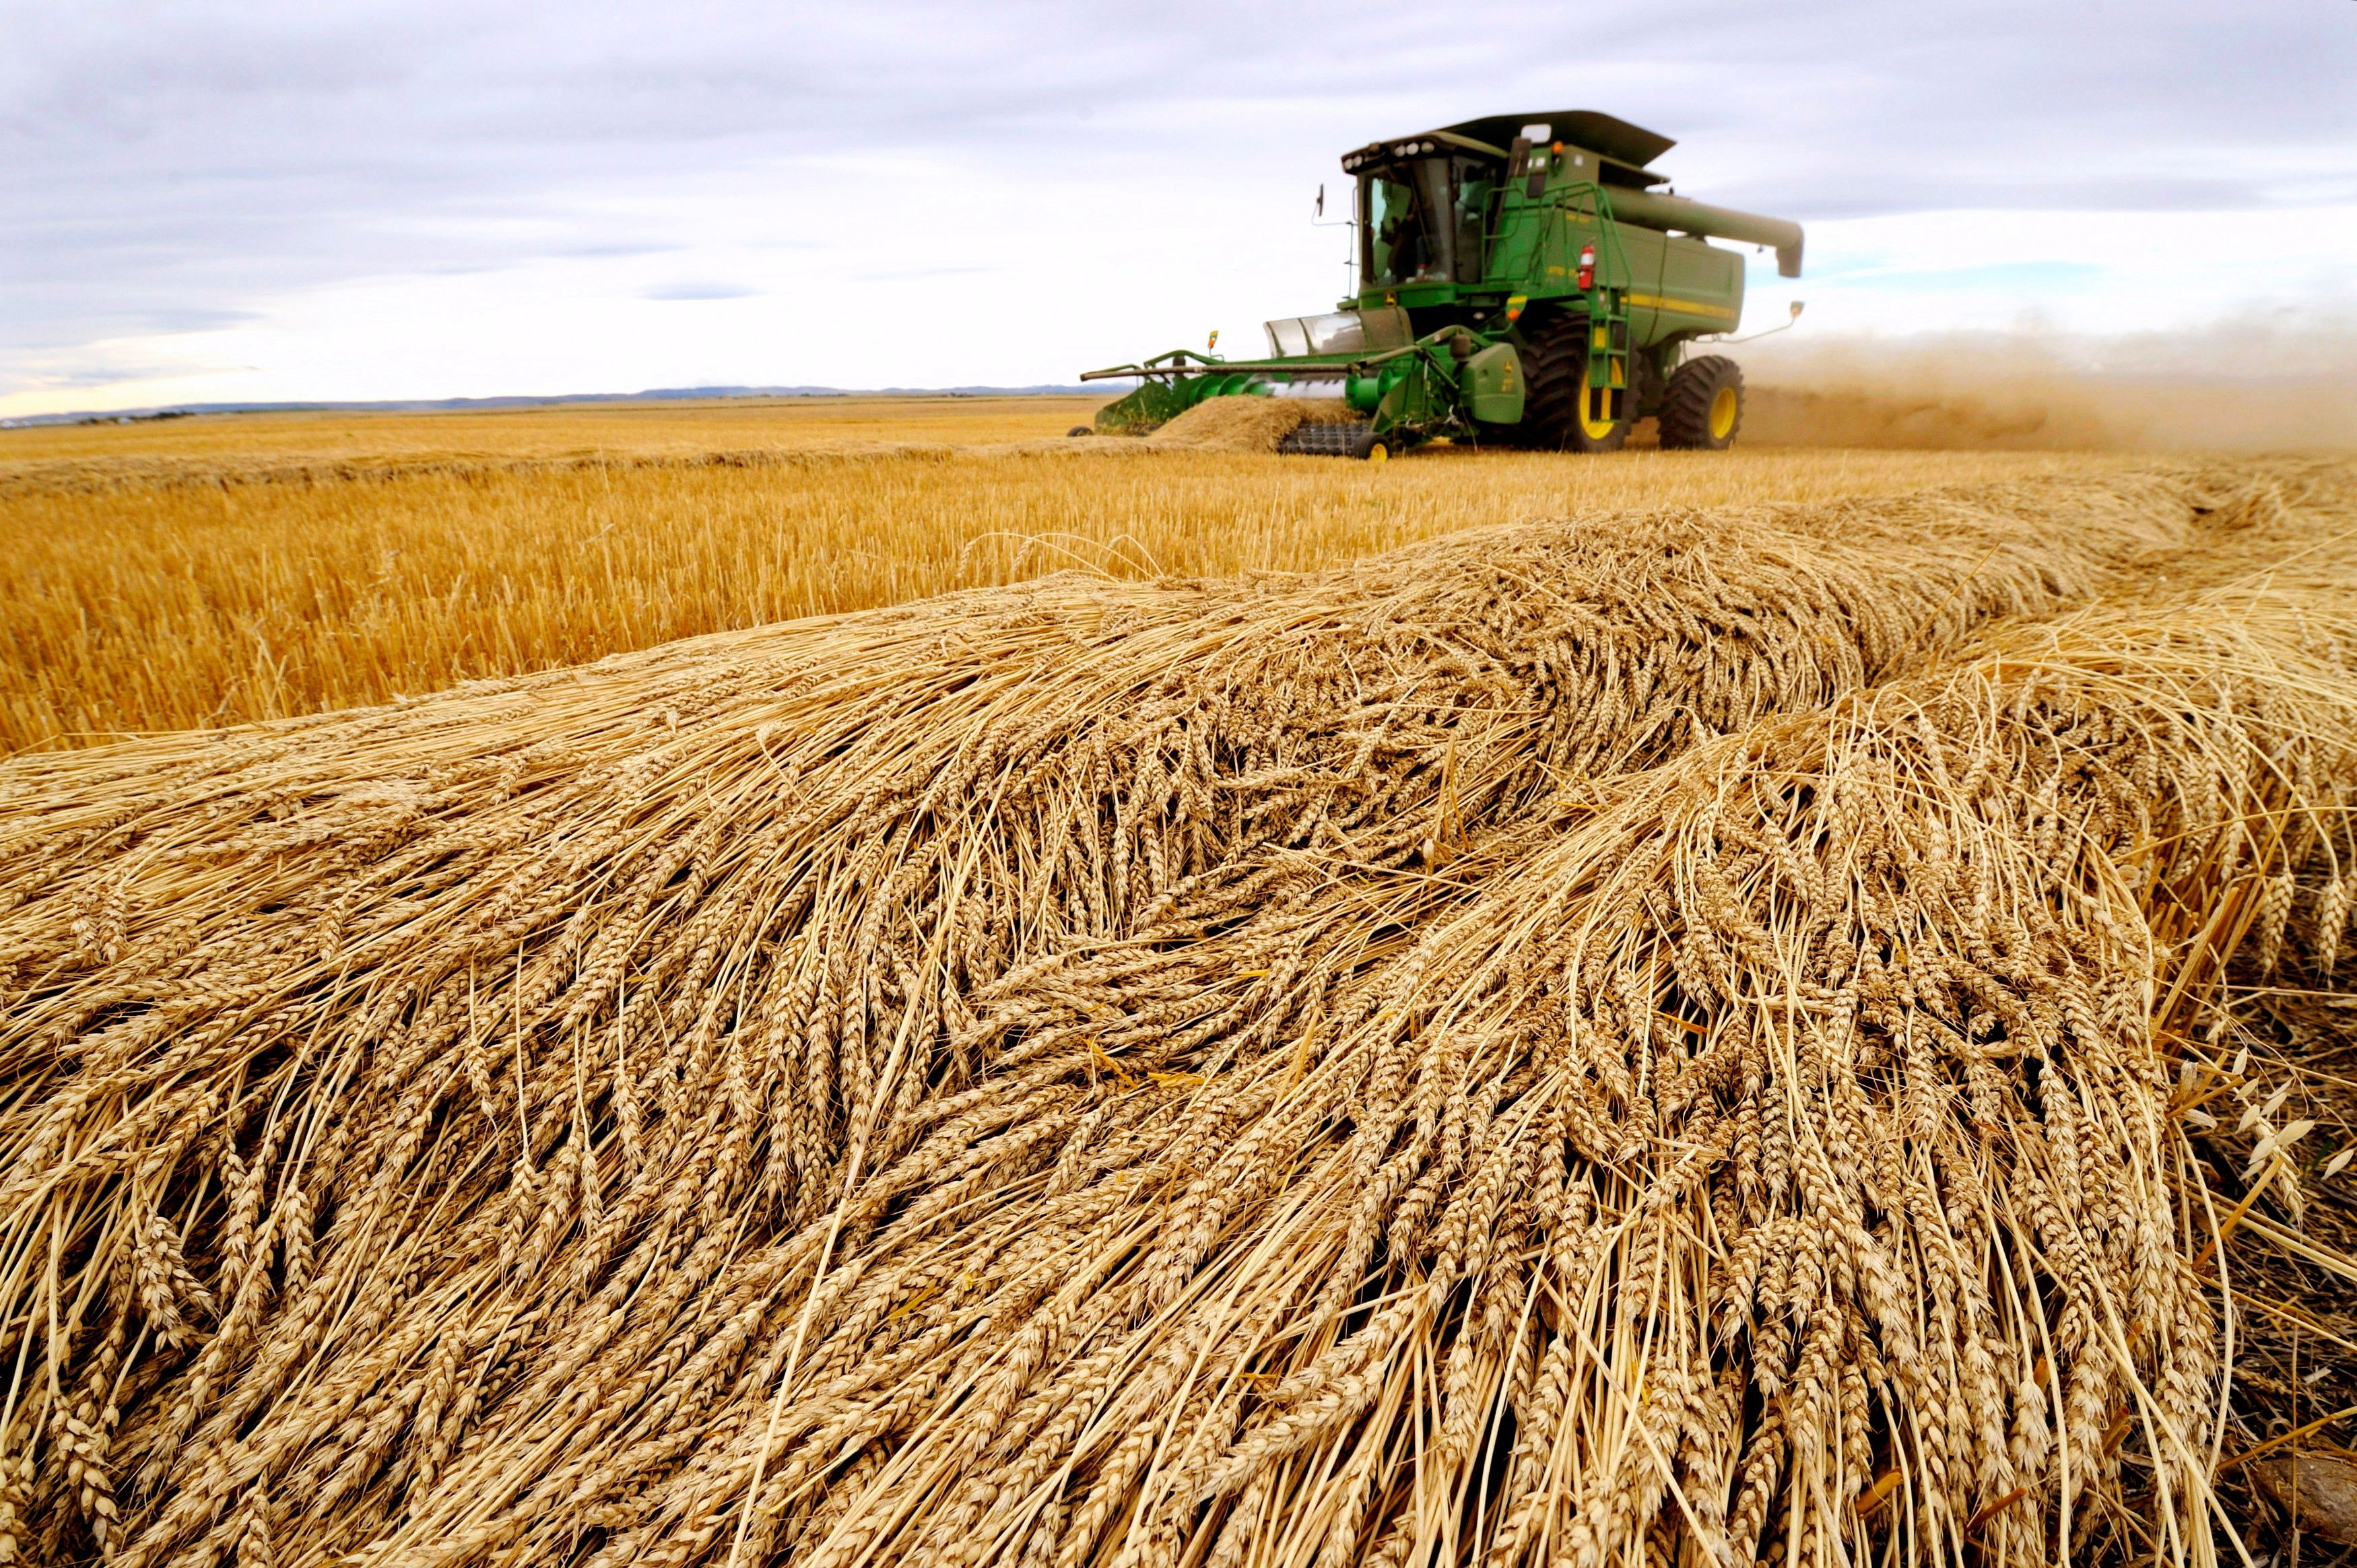 Tara Giles operates a combine as she harvests wheat on a 160-acre field located south of High River, Alberta